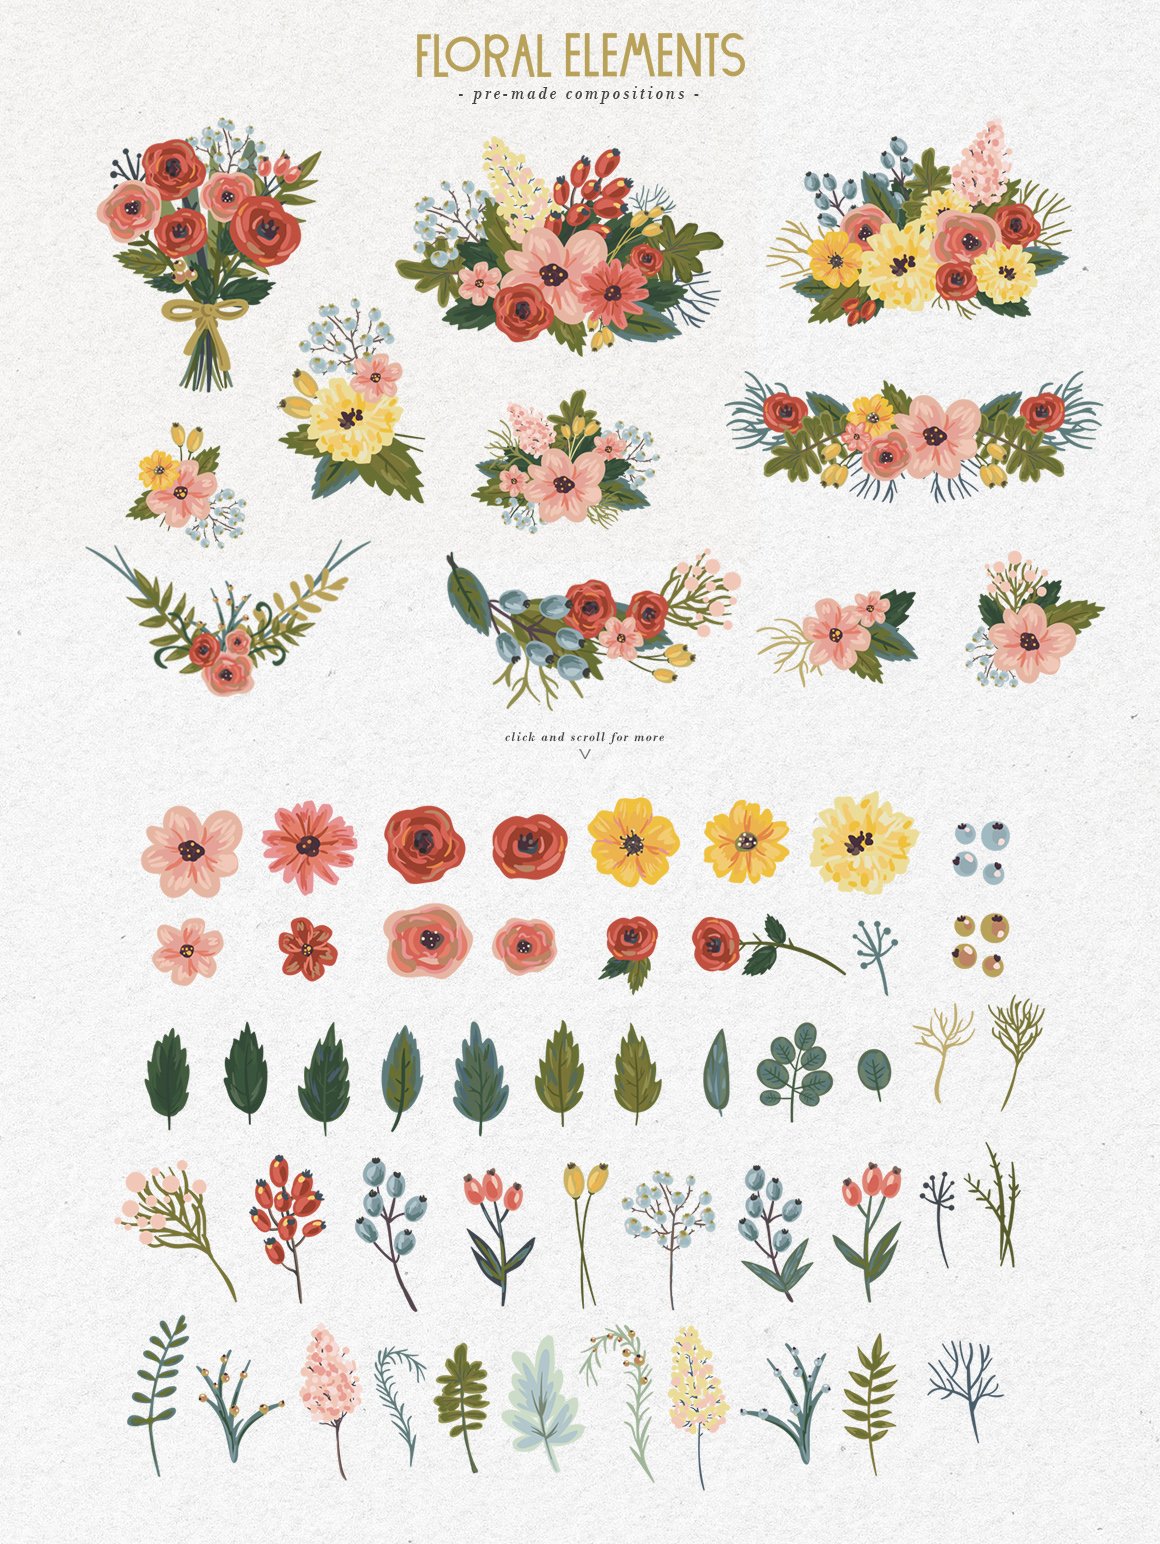 Beautiful prints with flowers and plants.